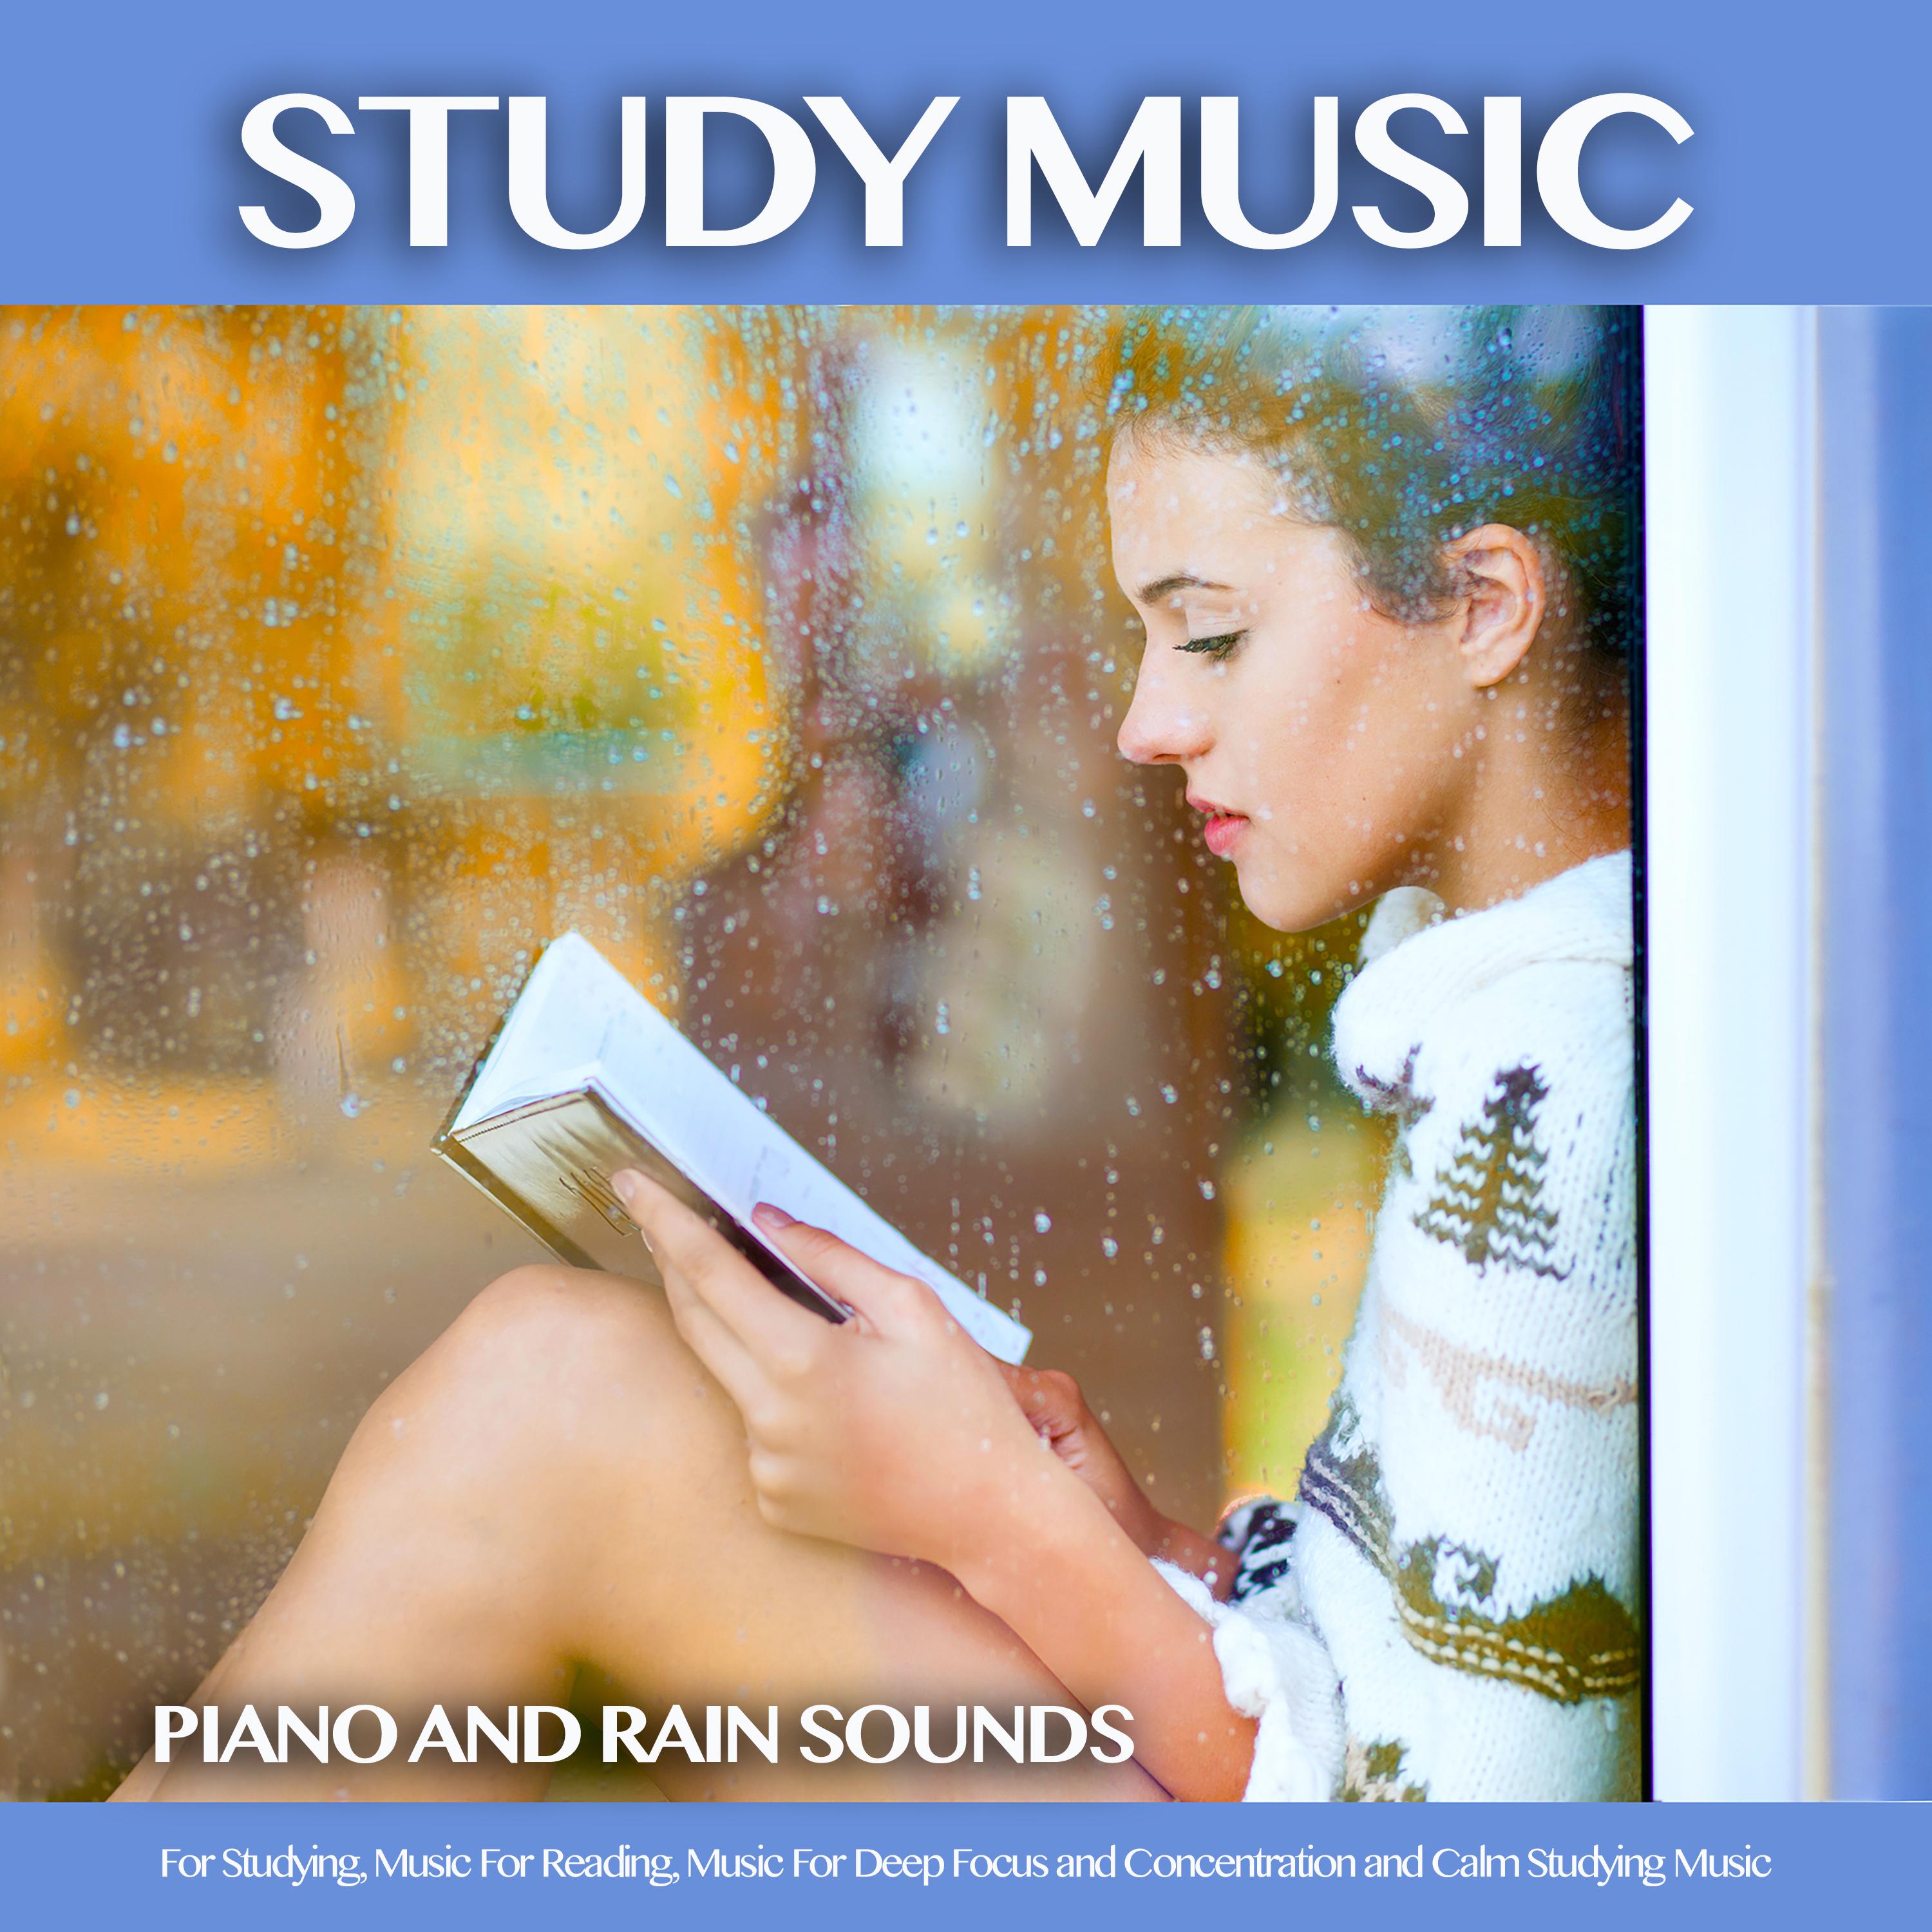 Ambient Music For Reading and Sounds of Rain